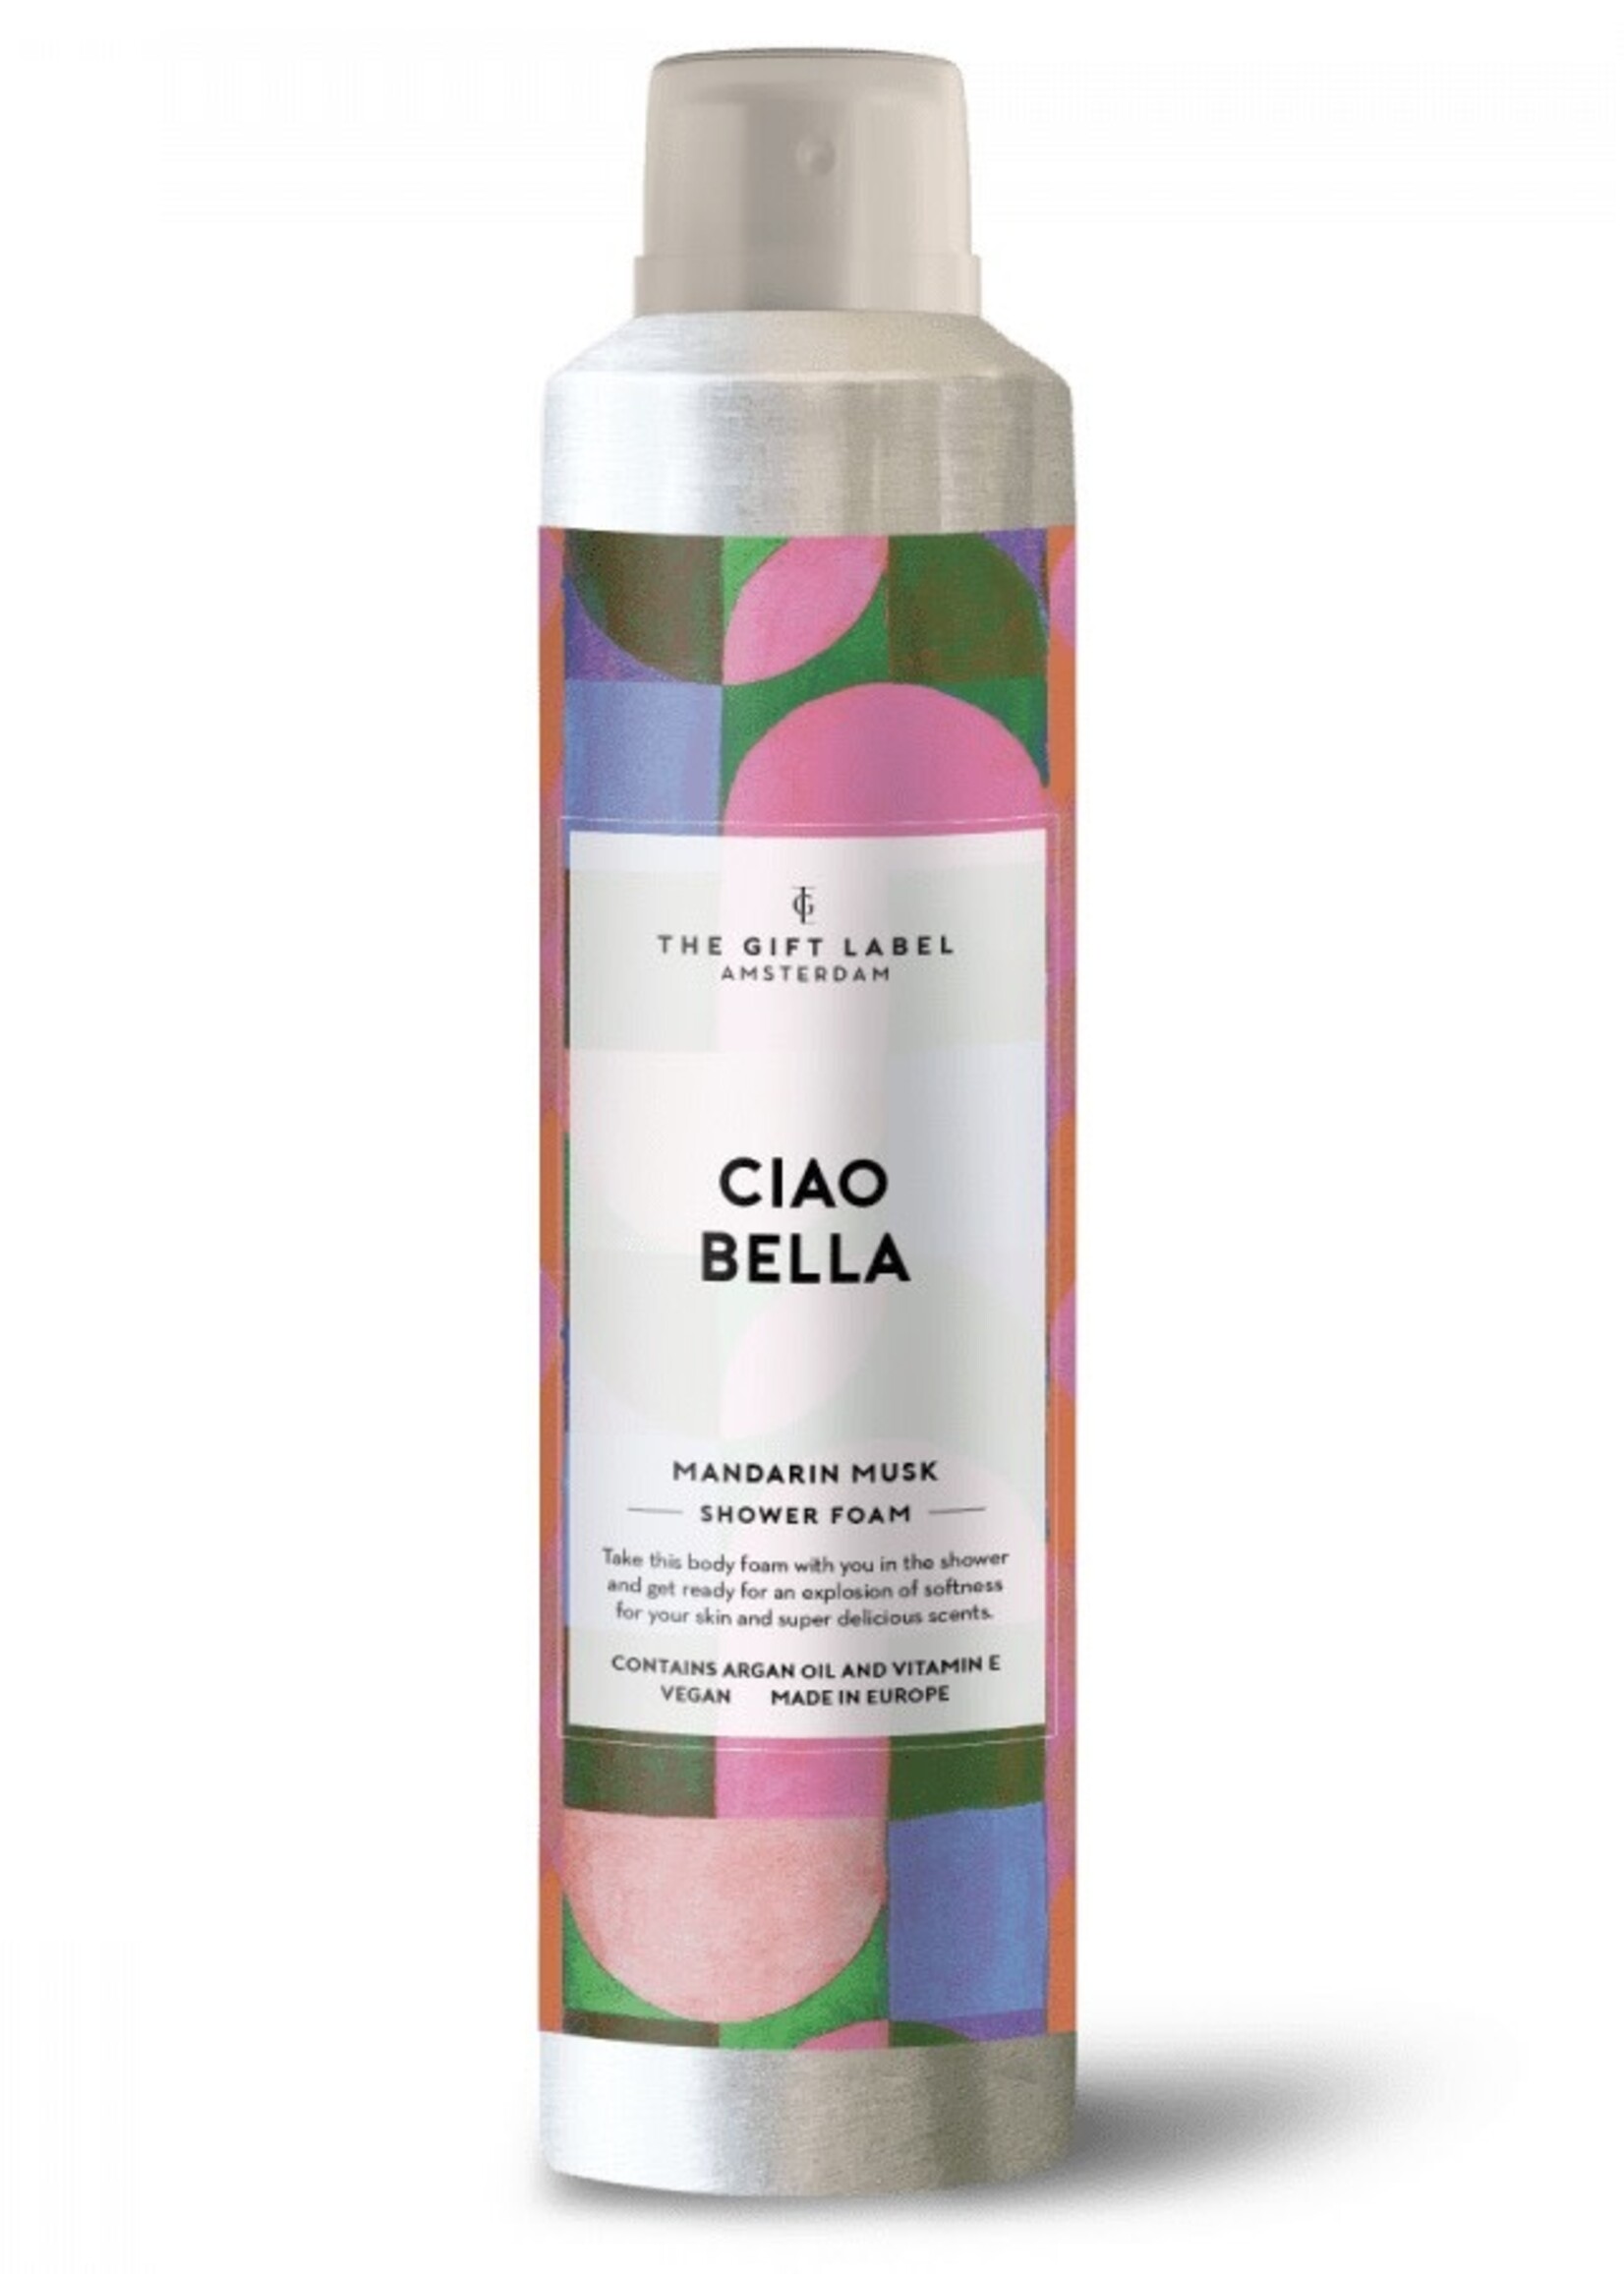 The Gift Label The Gift Label Shower foam 200ml Ciao bella